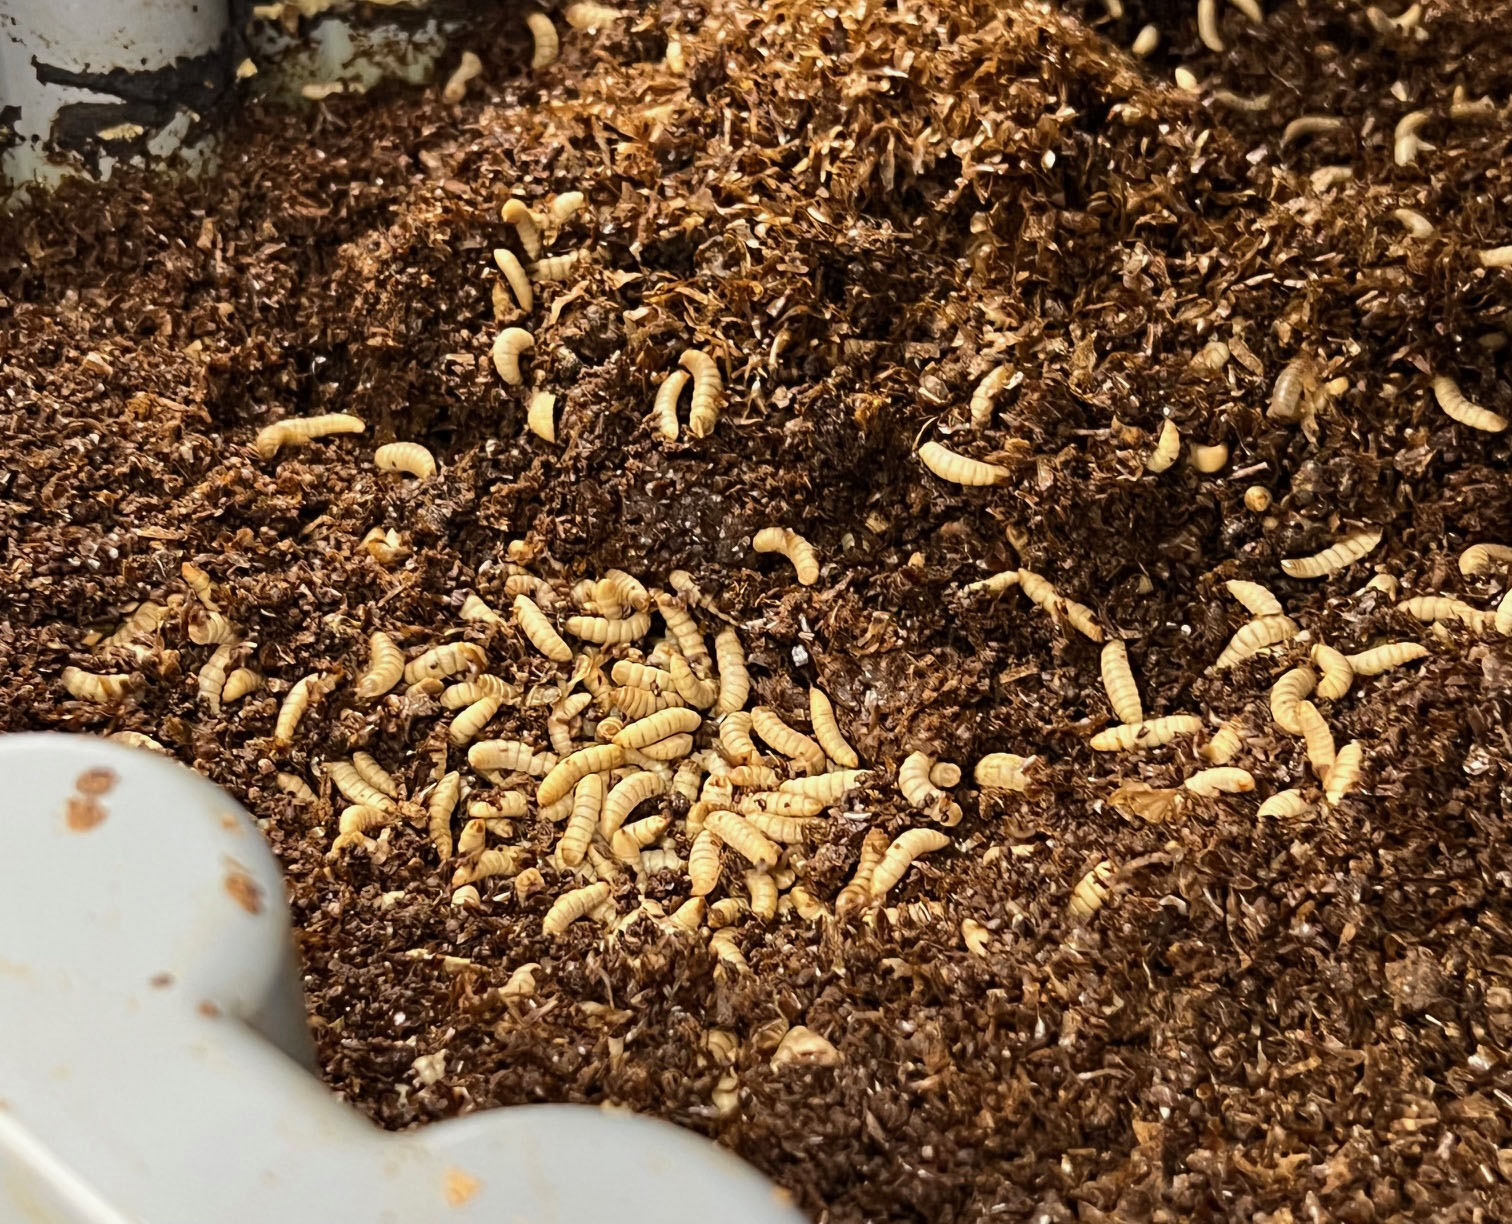 Innovafeed uses black soldier fly larvae (BSFL) to produce sustainable ingredients